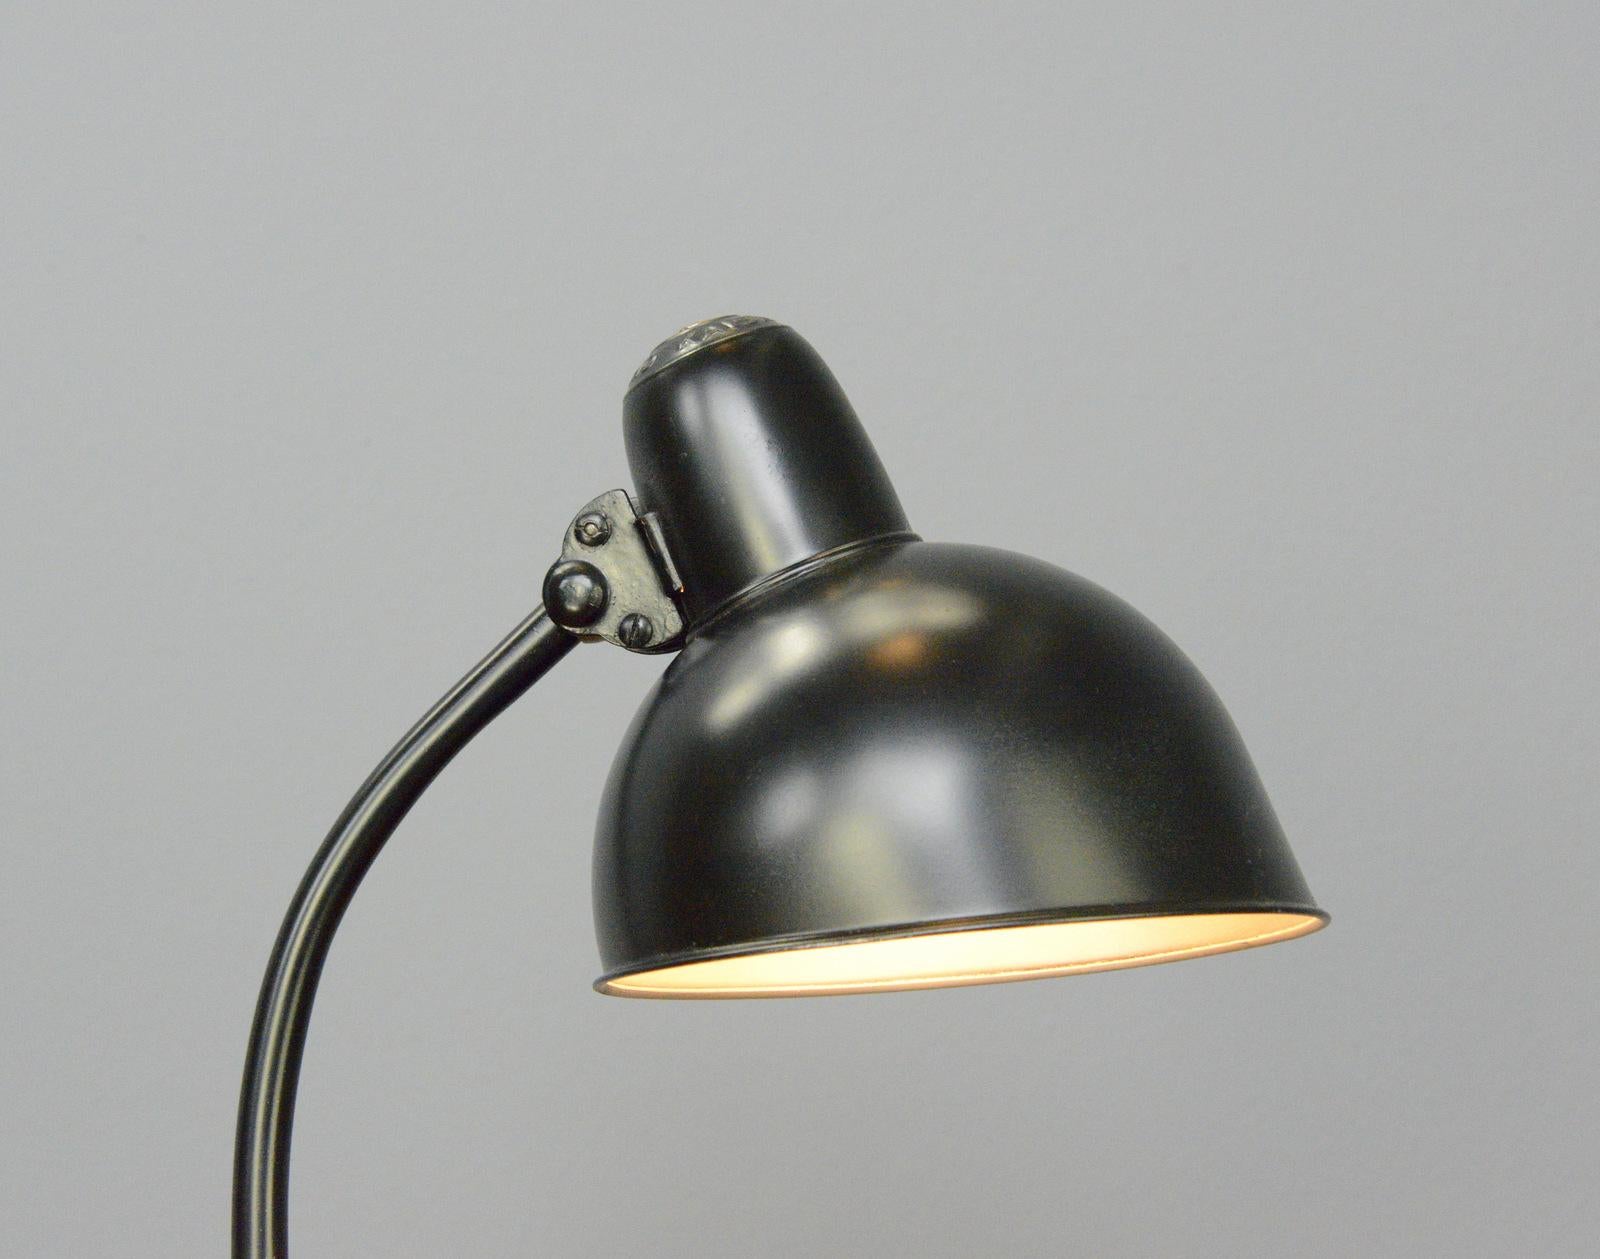 Steel Model 6556 Table Lamp by Kaiser Idell, Circa 1930s